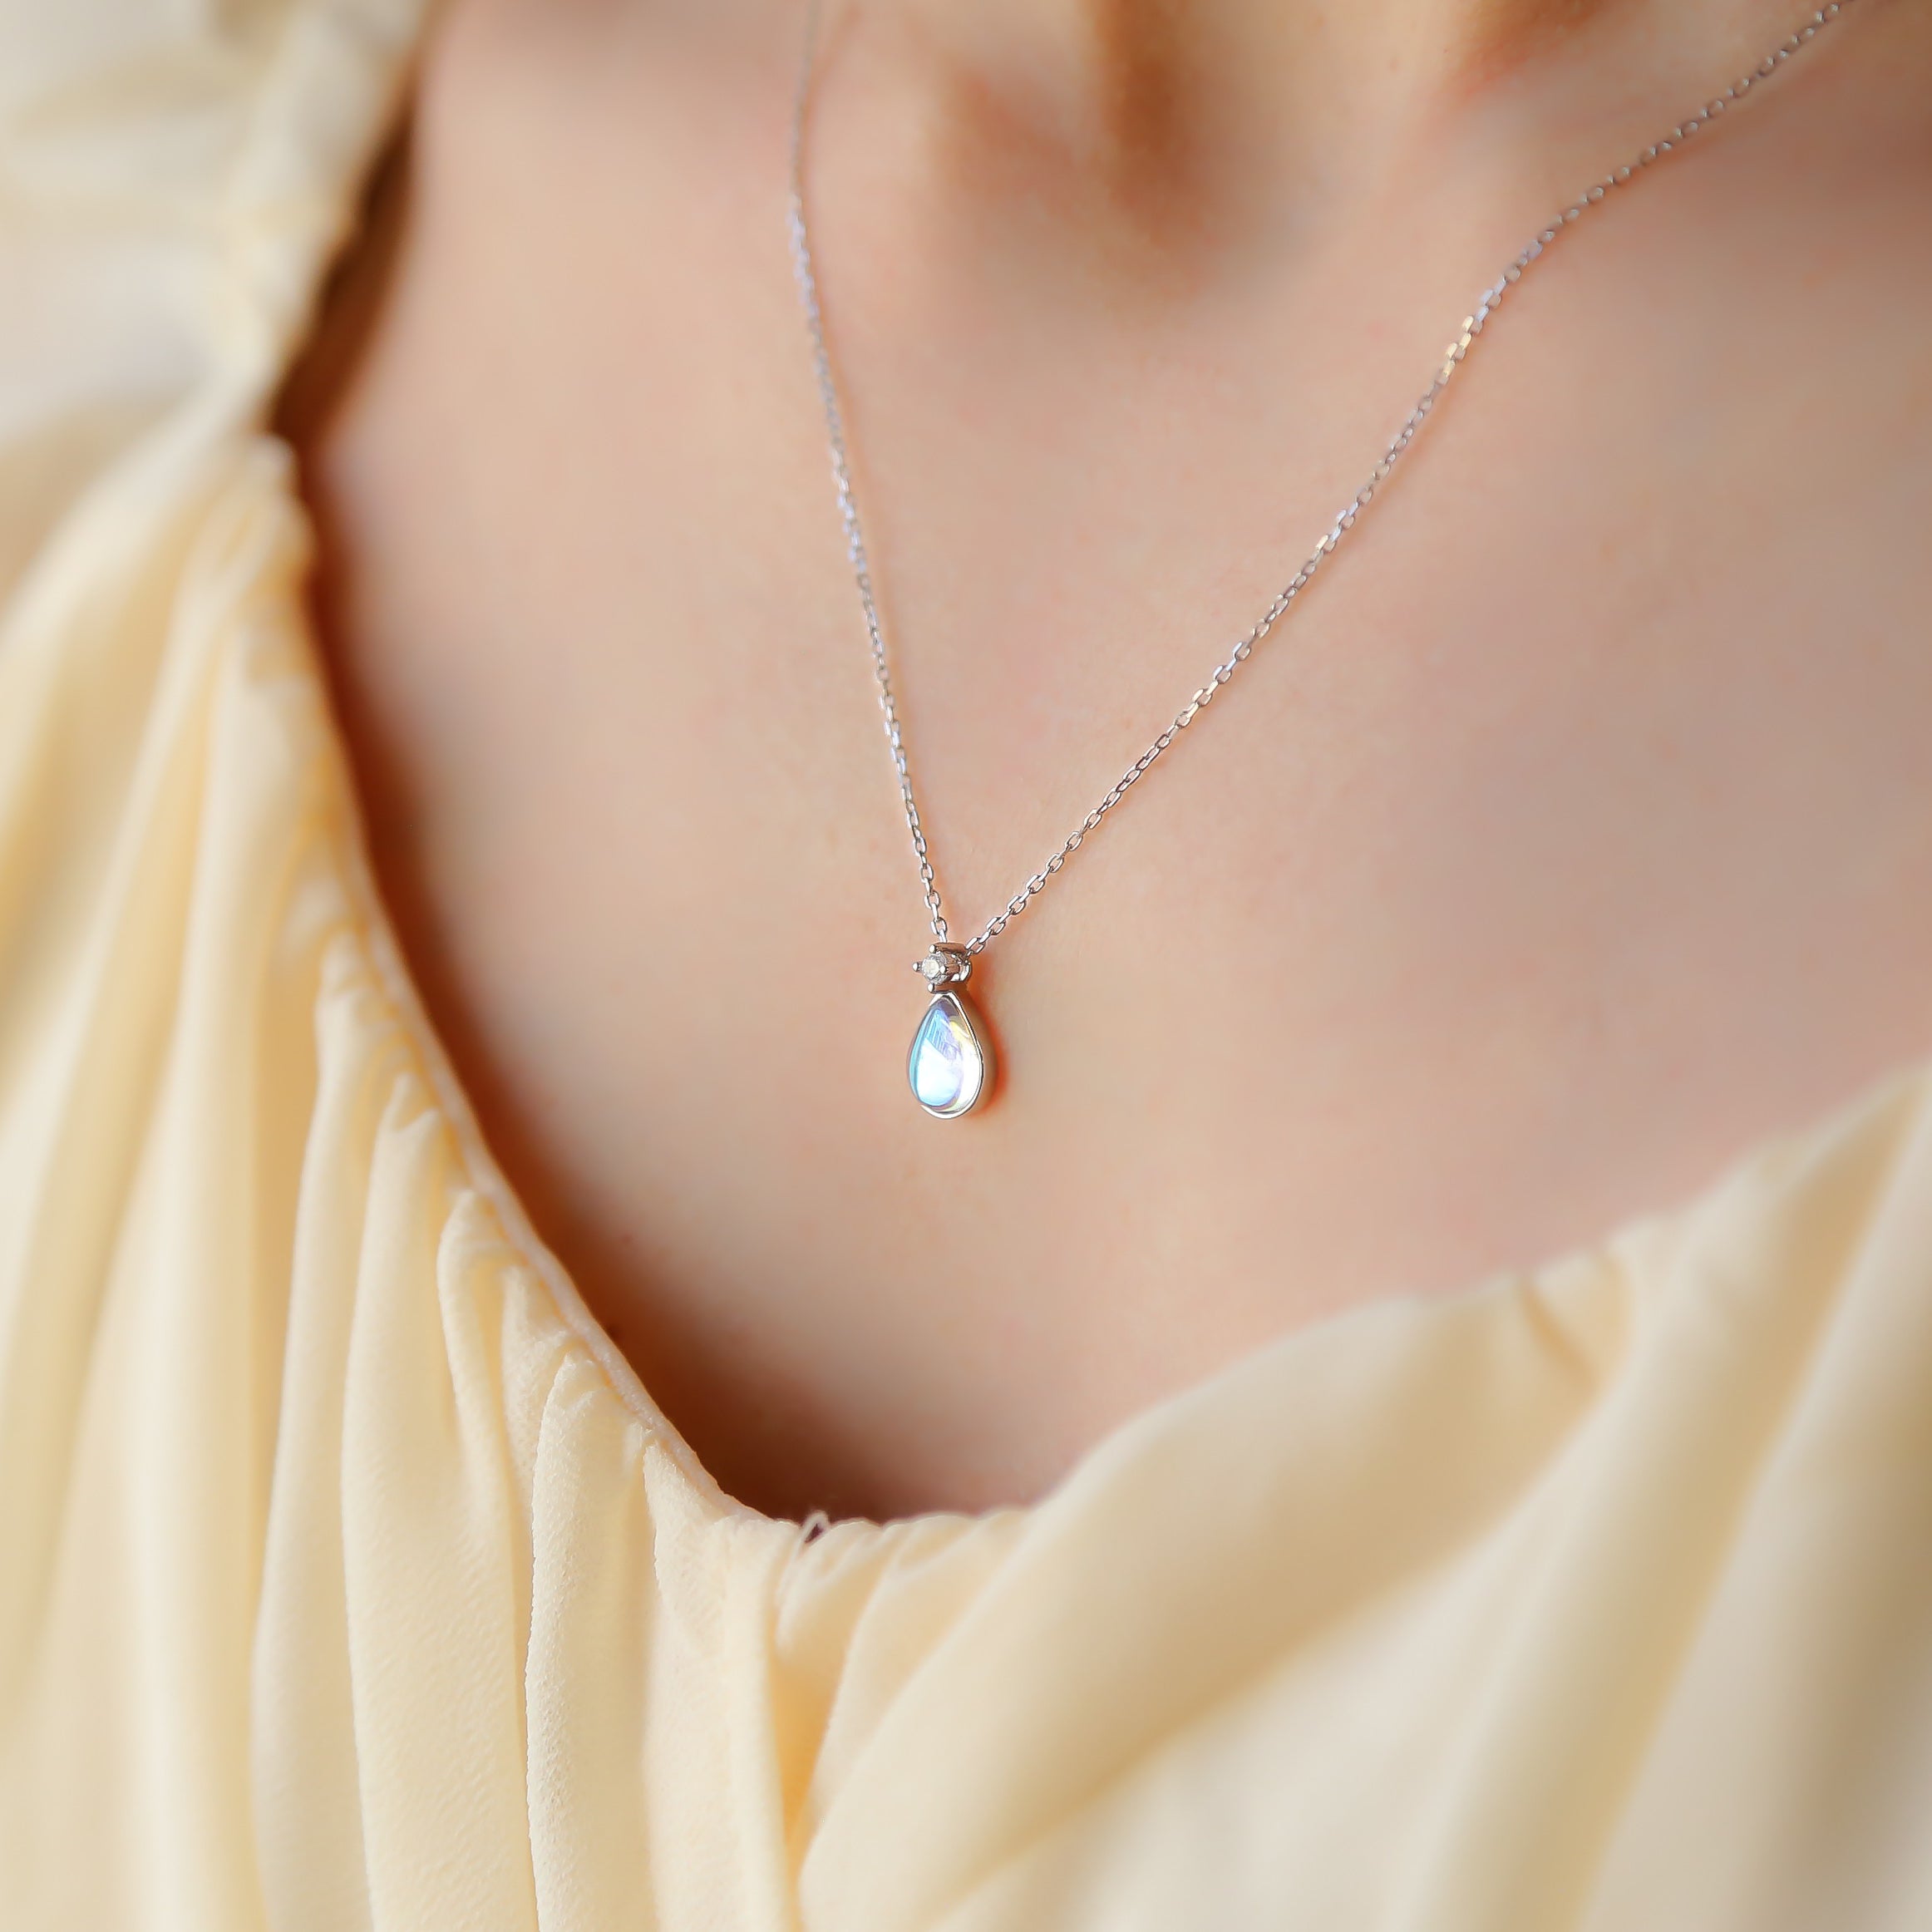 PARIS - Opal, Sterling Silver and CZ Necklace